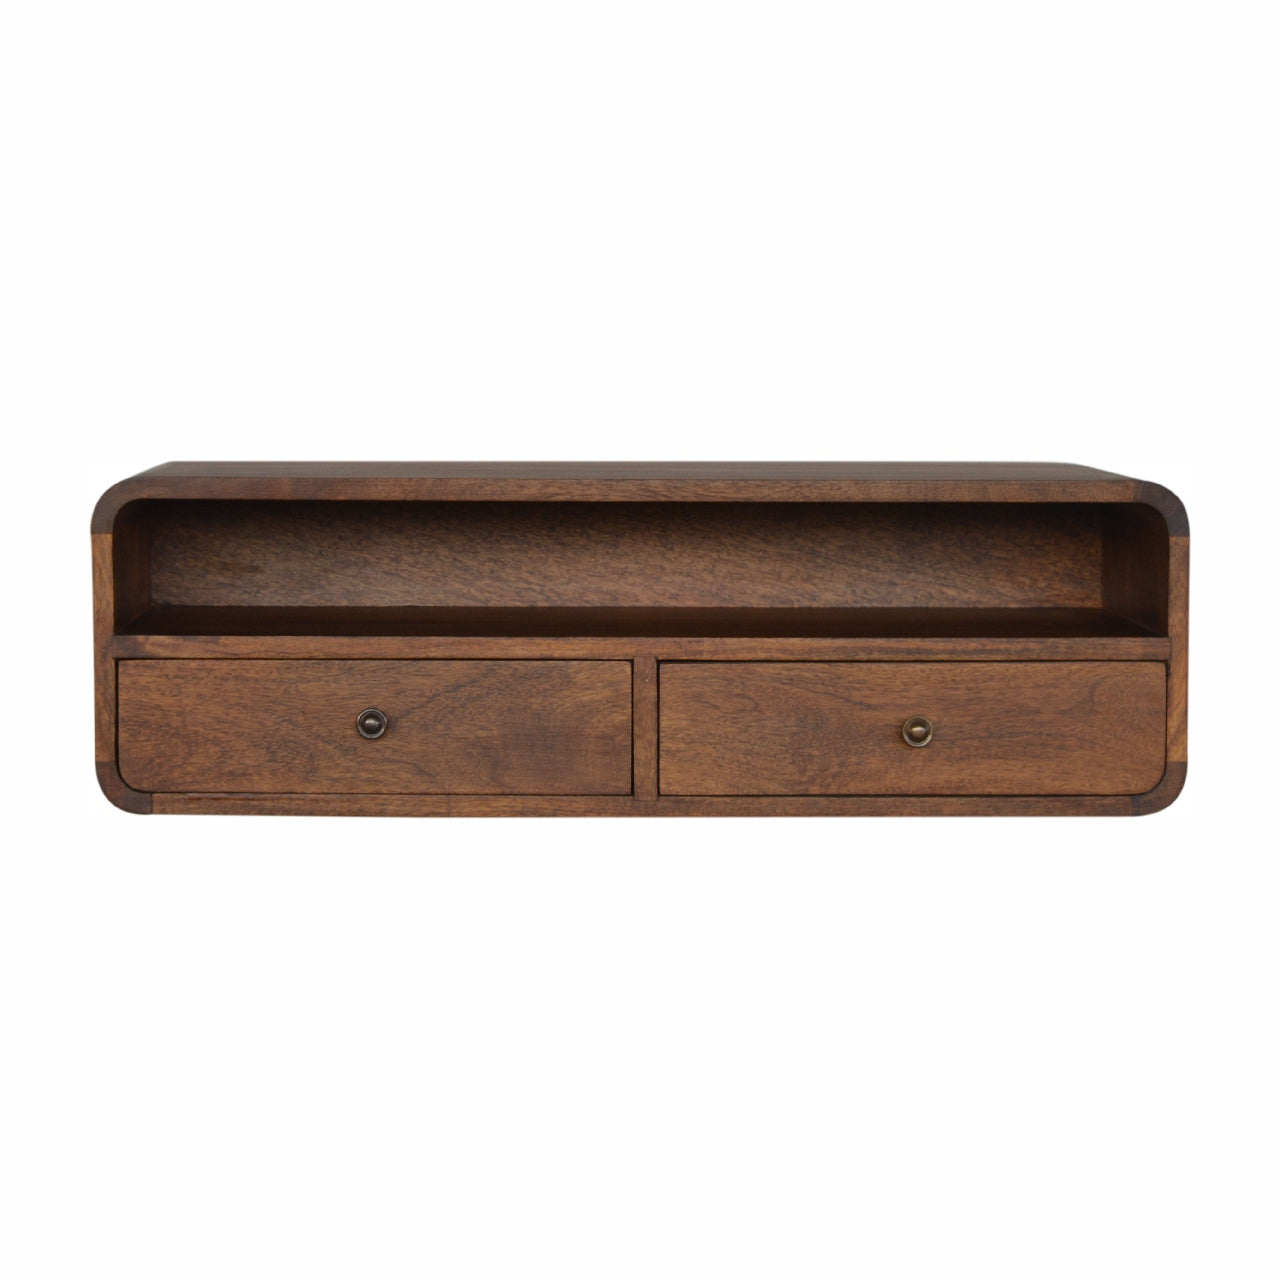 View Floating Chestnut Open Console information